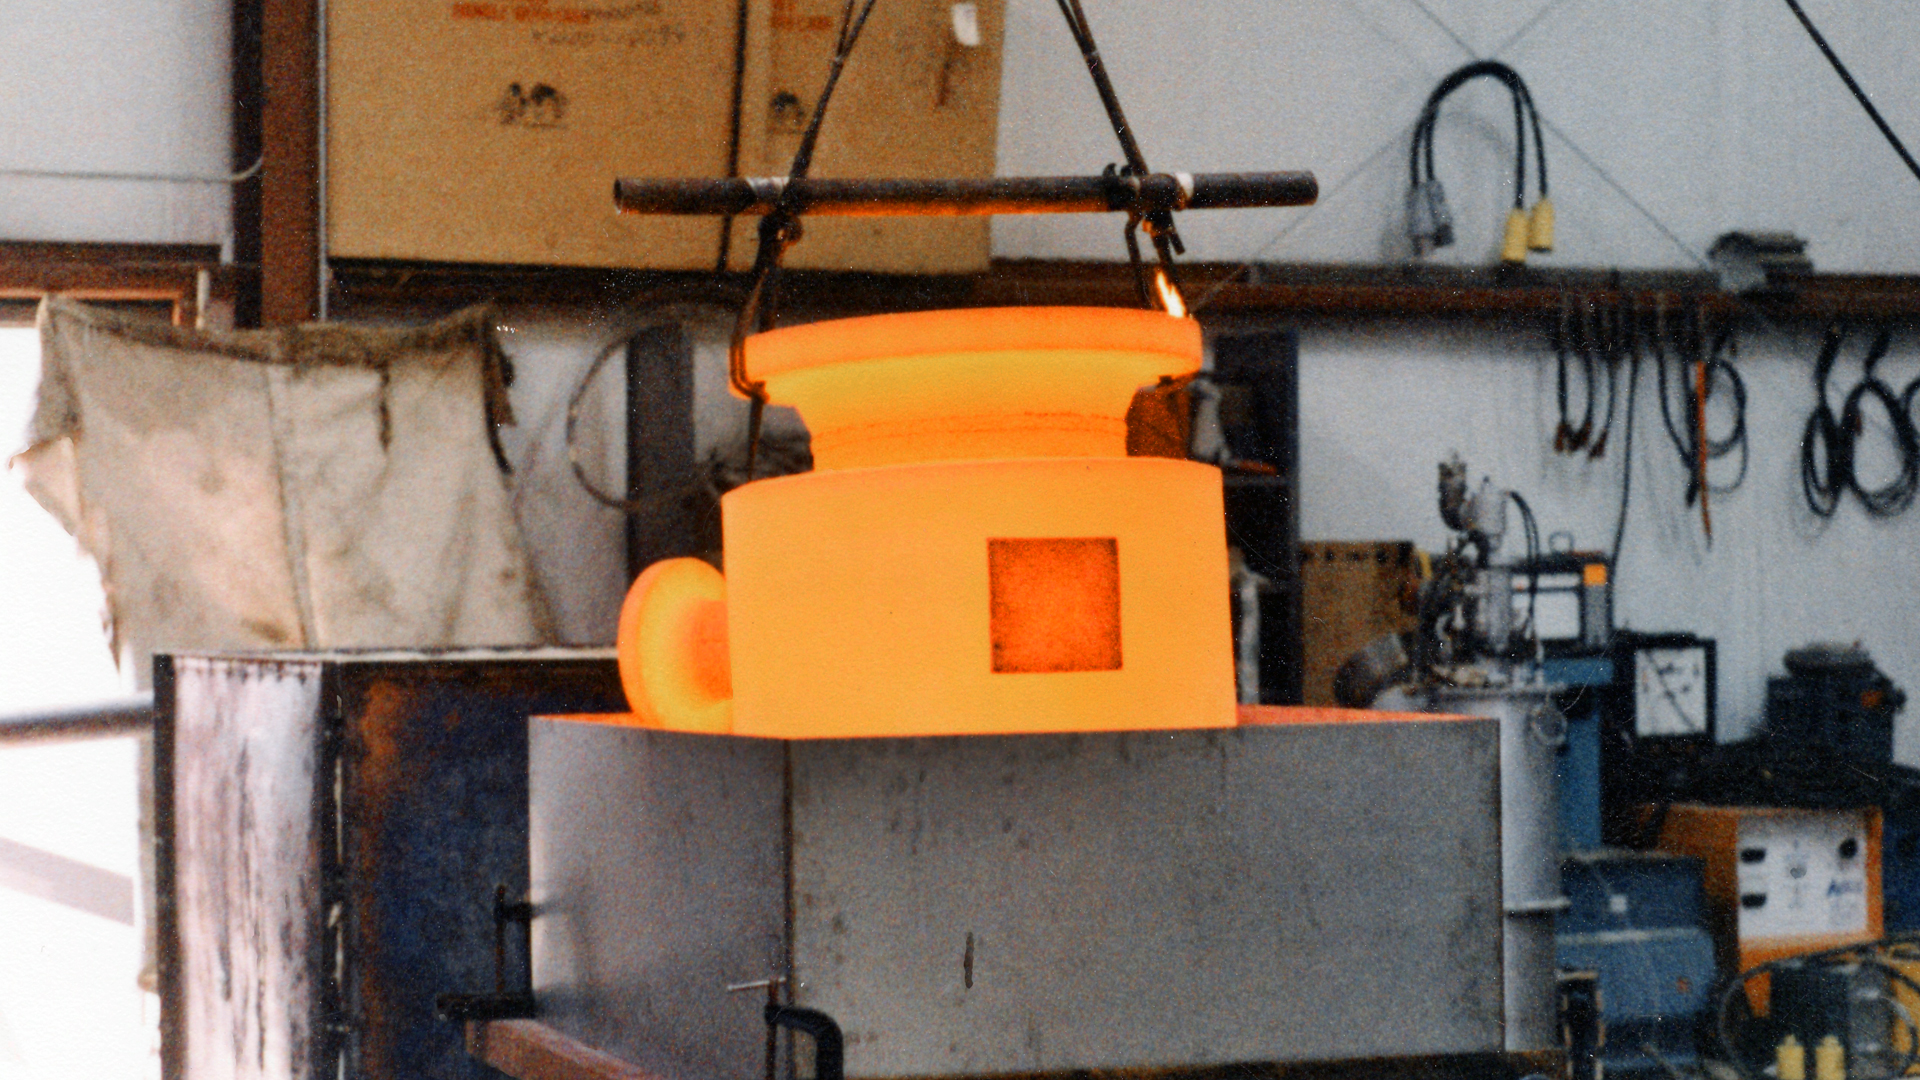 Pressure vessel for a major chemical company being solution annealed. The part is removed at 1,950° F then quenched.